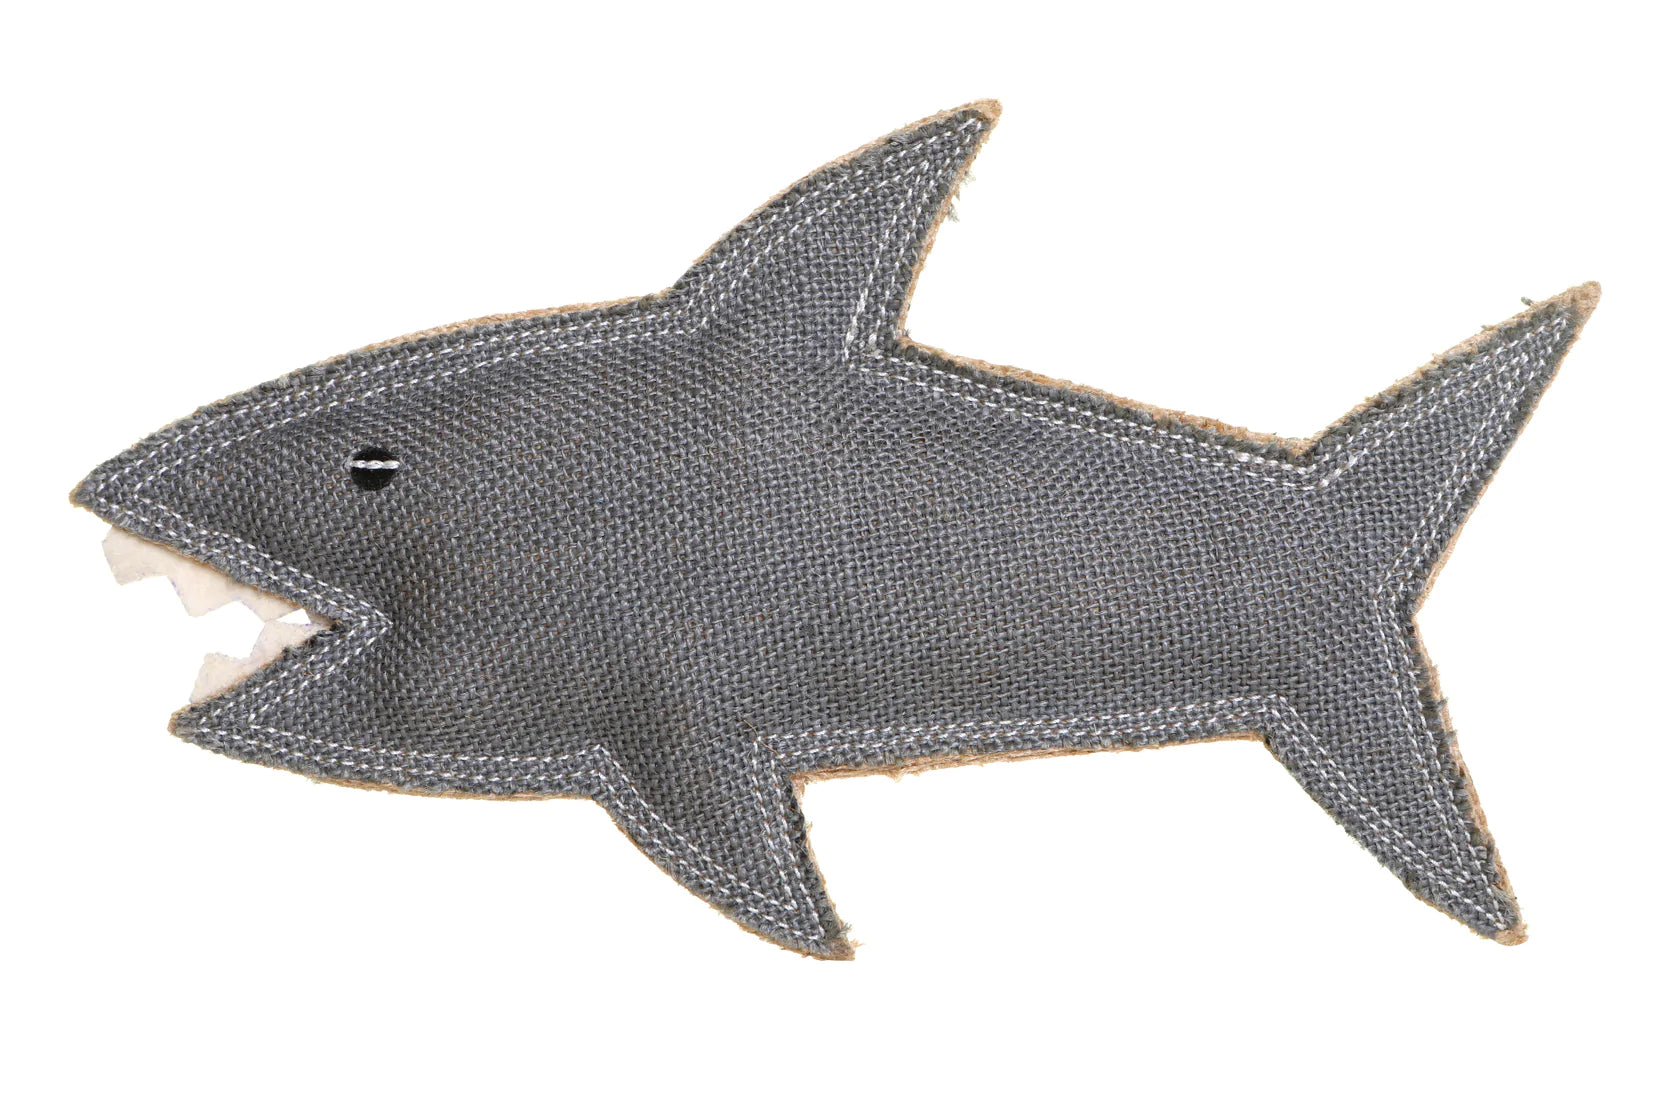 Outback Tails Jute Dog Toy - Shazza the Great White Shark